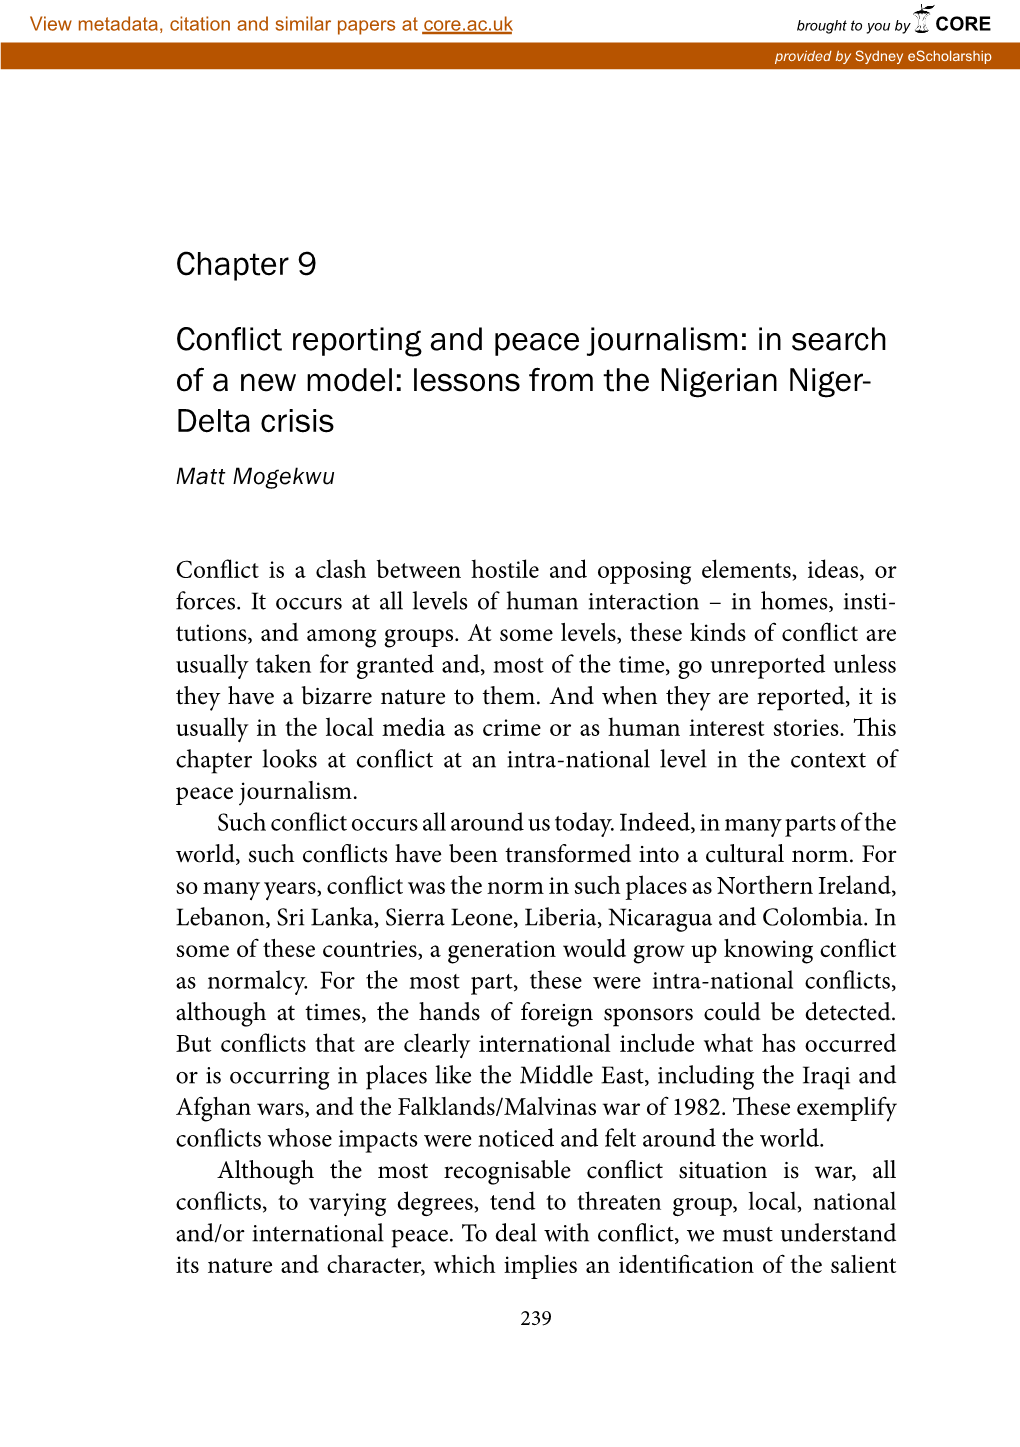 Chapter 9 Conflict Reporting and Peace Journalism